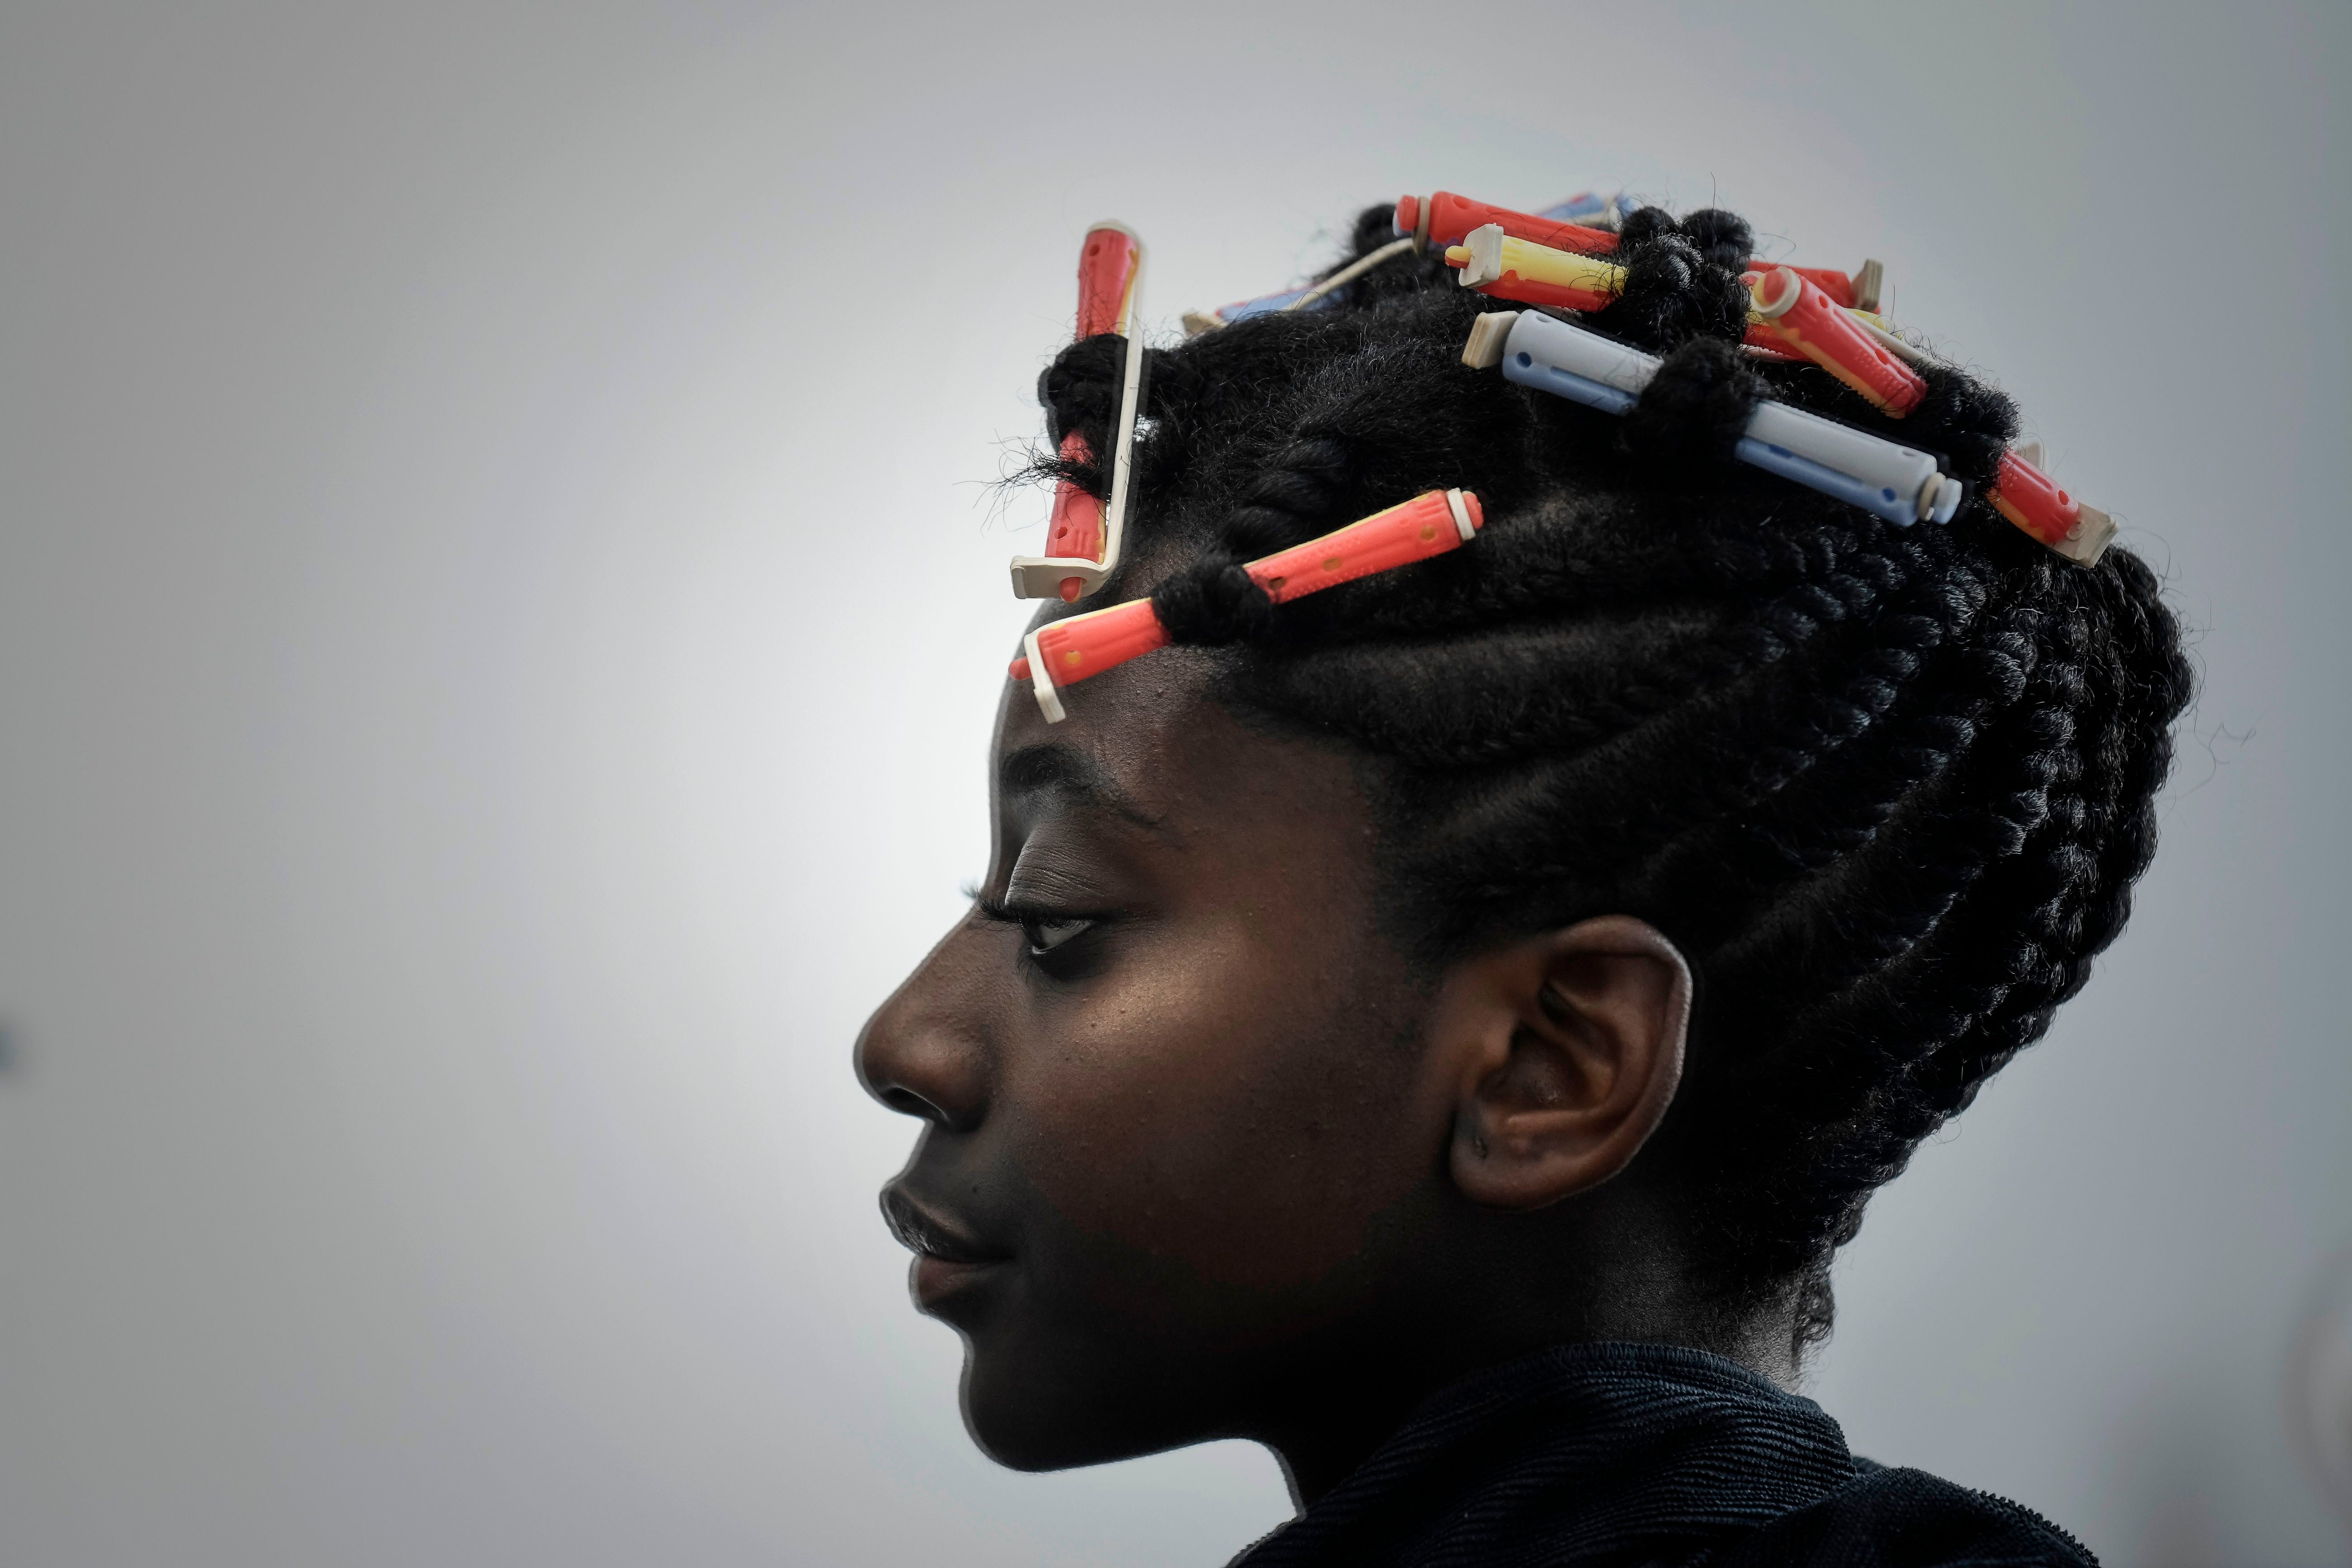 Campaign to shape Afro hair discrimination in schools | The Independent